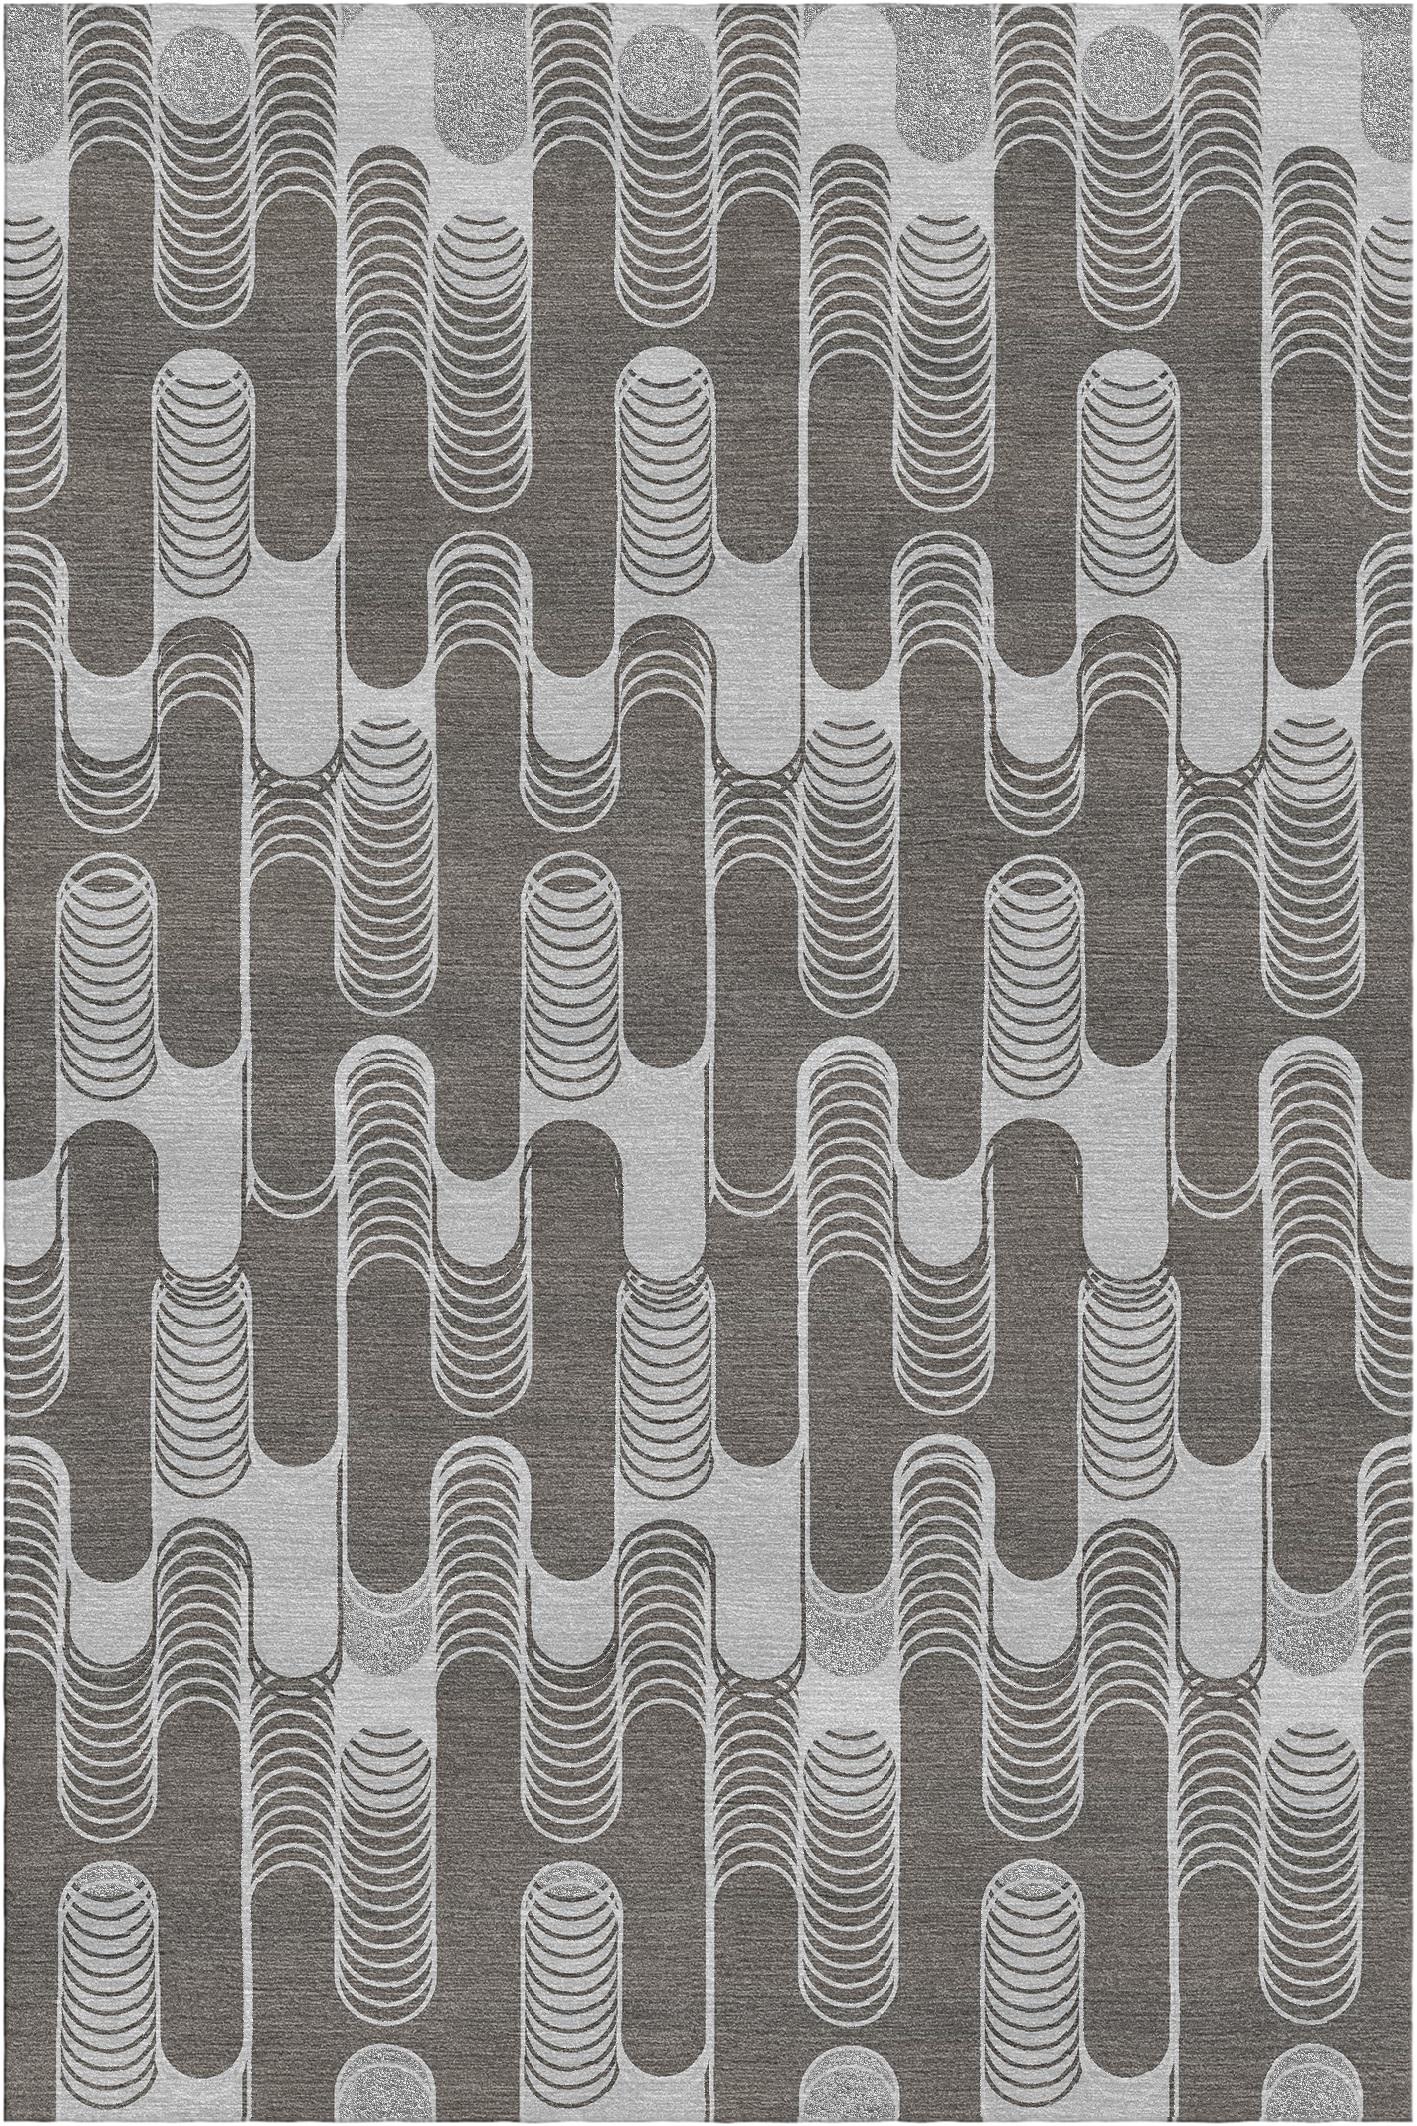 Settanta rug II by Giulio Brambilla.
Dimensions: D 300 x W 200 x H 1.5 cm.
Materials: NZ wool, bamboo silk.
Available in other colors.

Boasting a modern geometric design of strong visual impact, this rug will make a singular statement in any